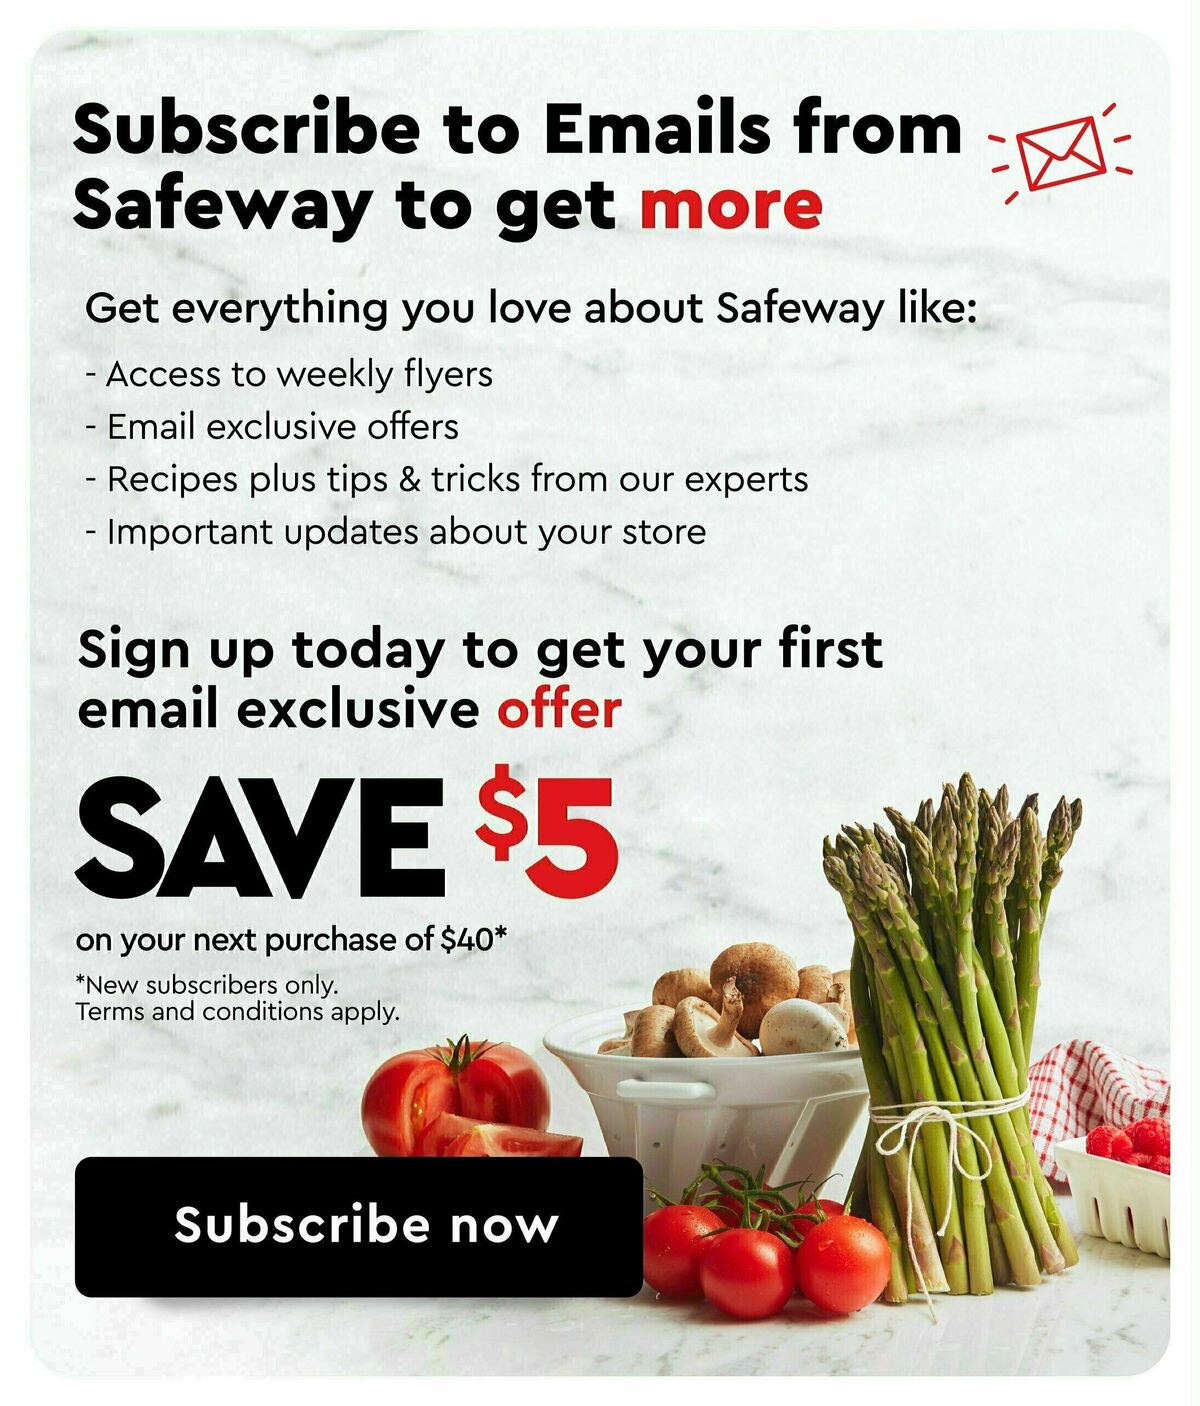 Safeway Flyer from July 6